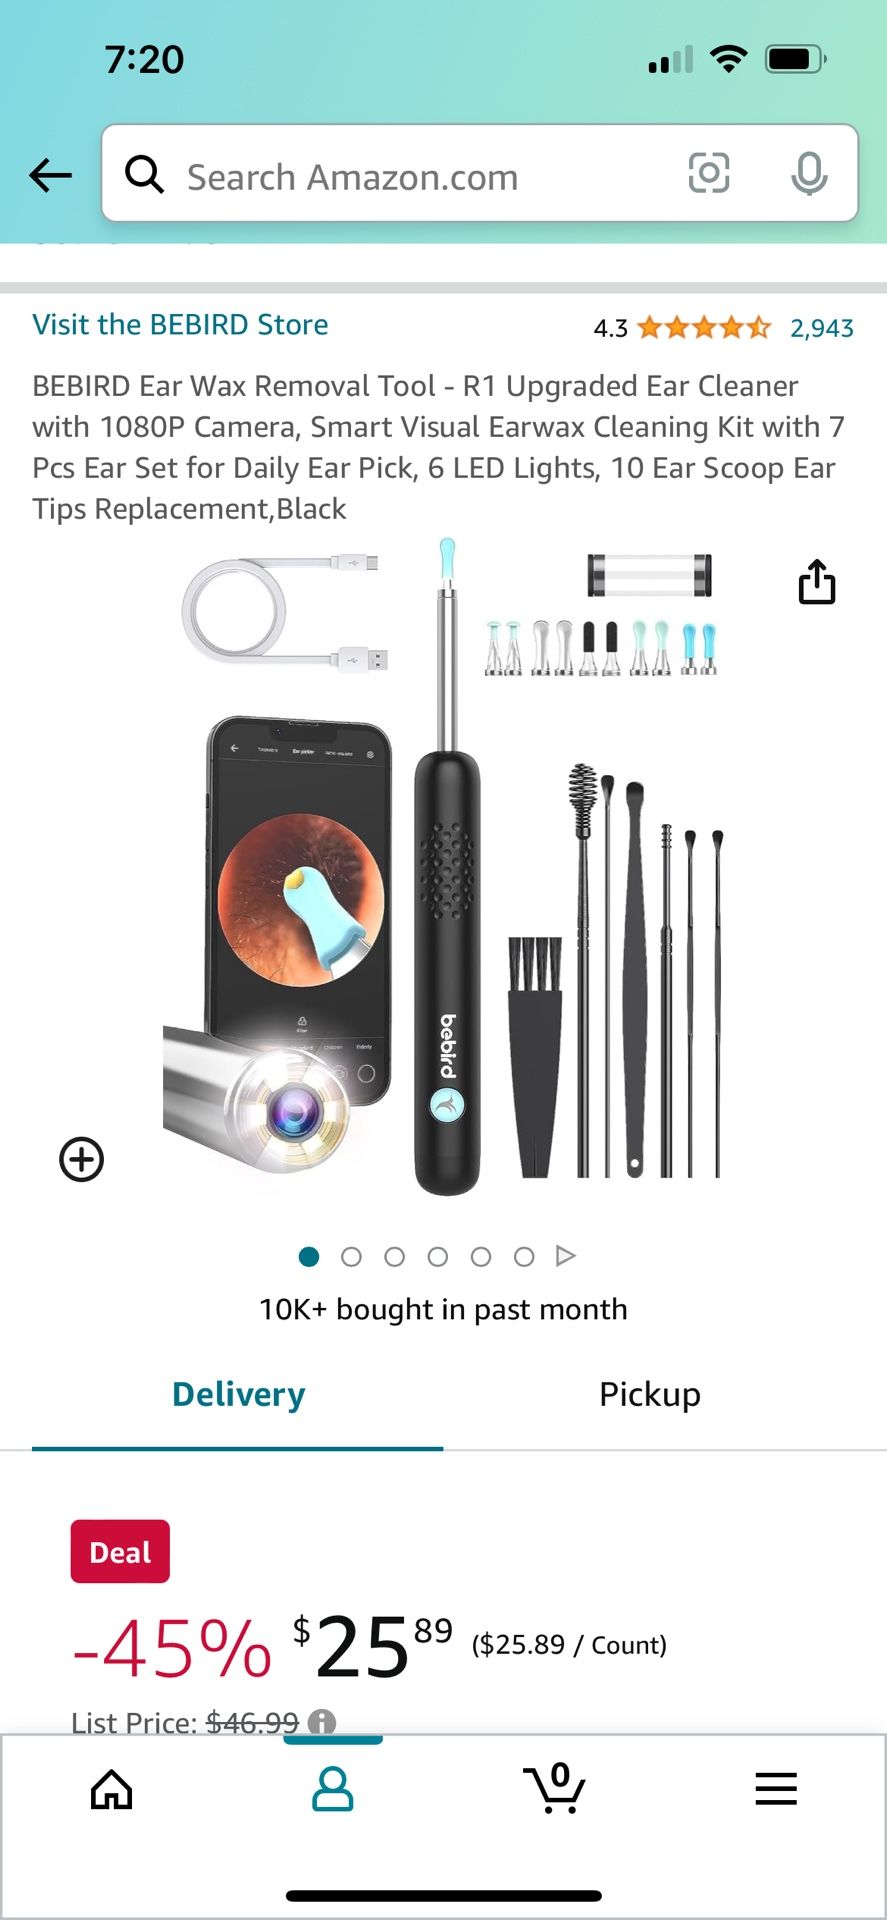 Ear Wax Removal Tool - R1 Upgraded Ear Cleaner with 1080P Camera, Smart Visual Earwax Cleaning Kit with 7 Pcs Ear Set for Daily Ear Pick, 6 LED Lights